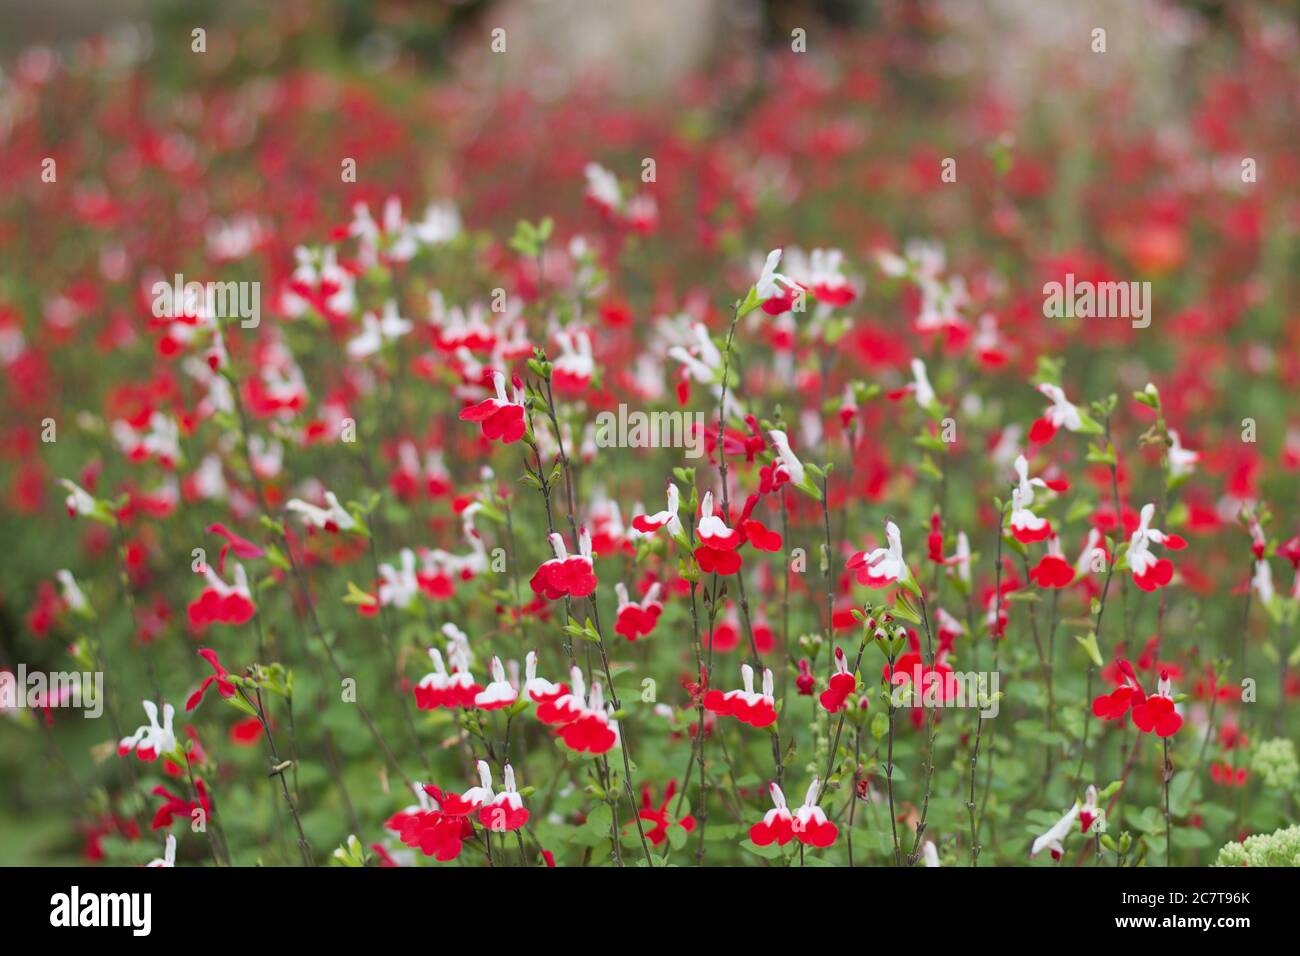 Summer floral background with red and white hardy salvia flowers and foliage Stock Photo